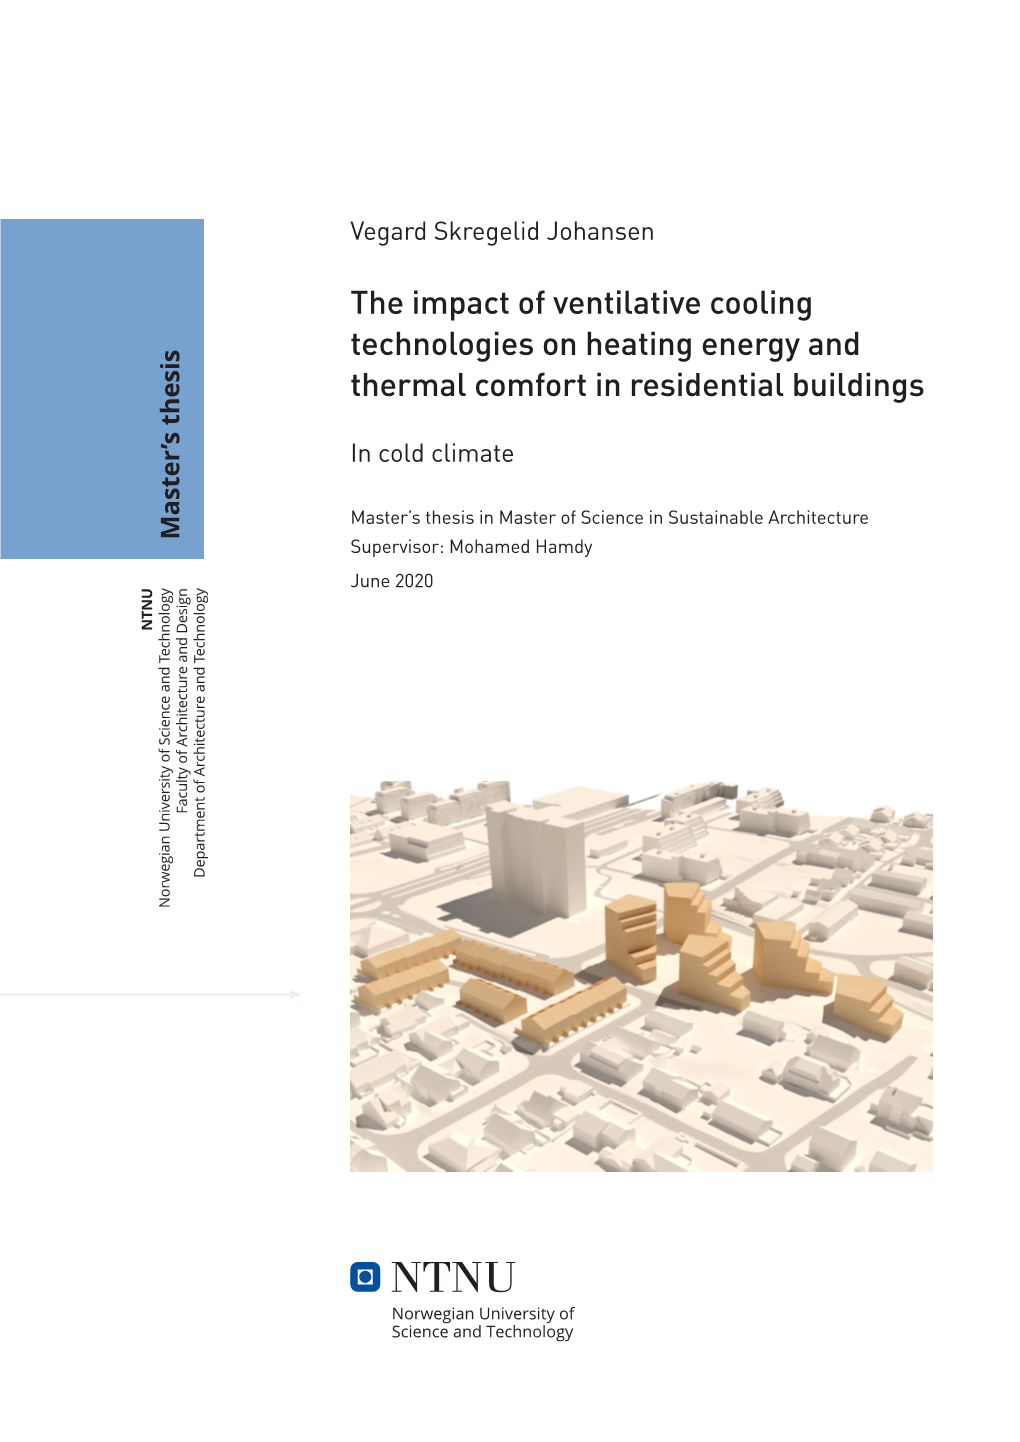 The Impact of Ventilative Cooling Technologies on Heating Energy and Thermal Comfort in Residential Buildings